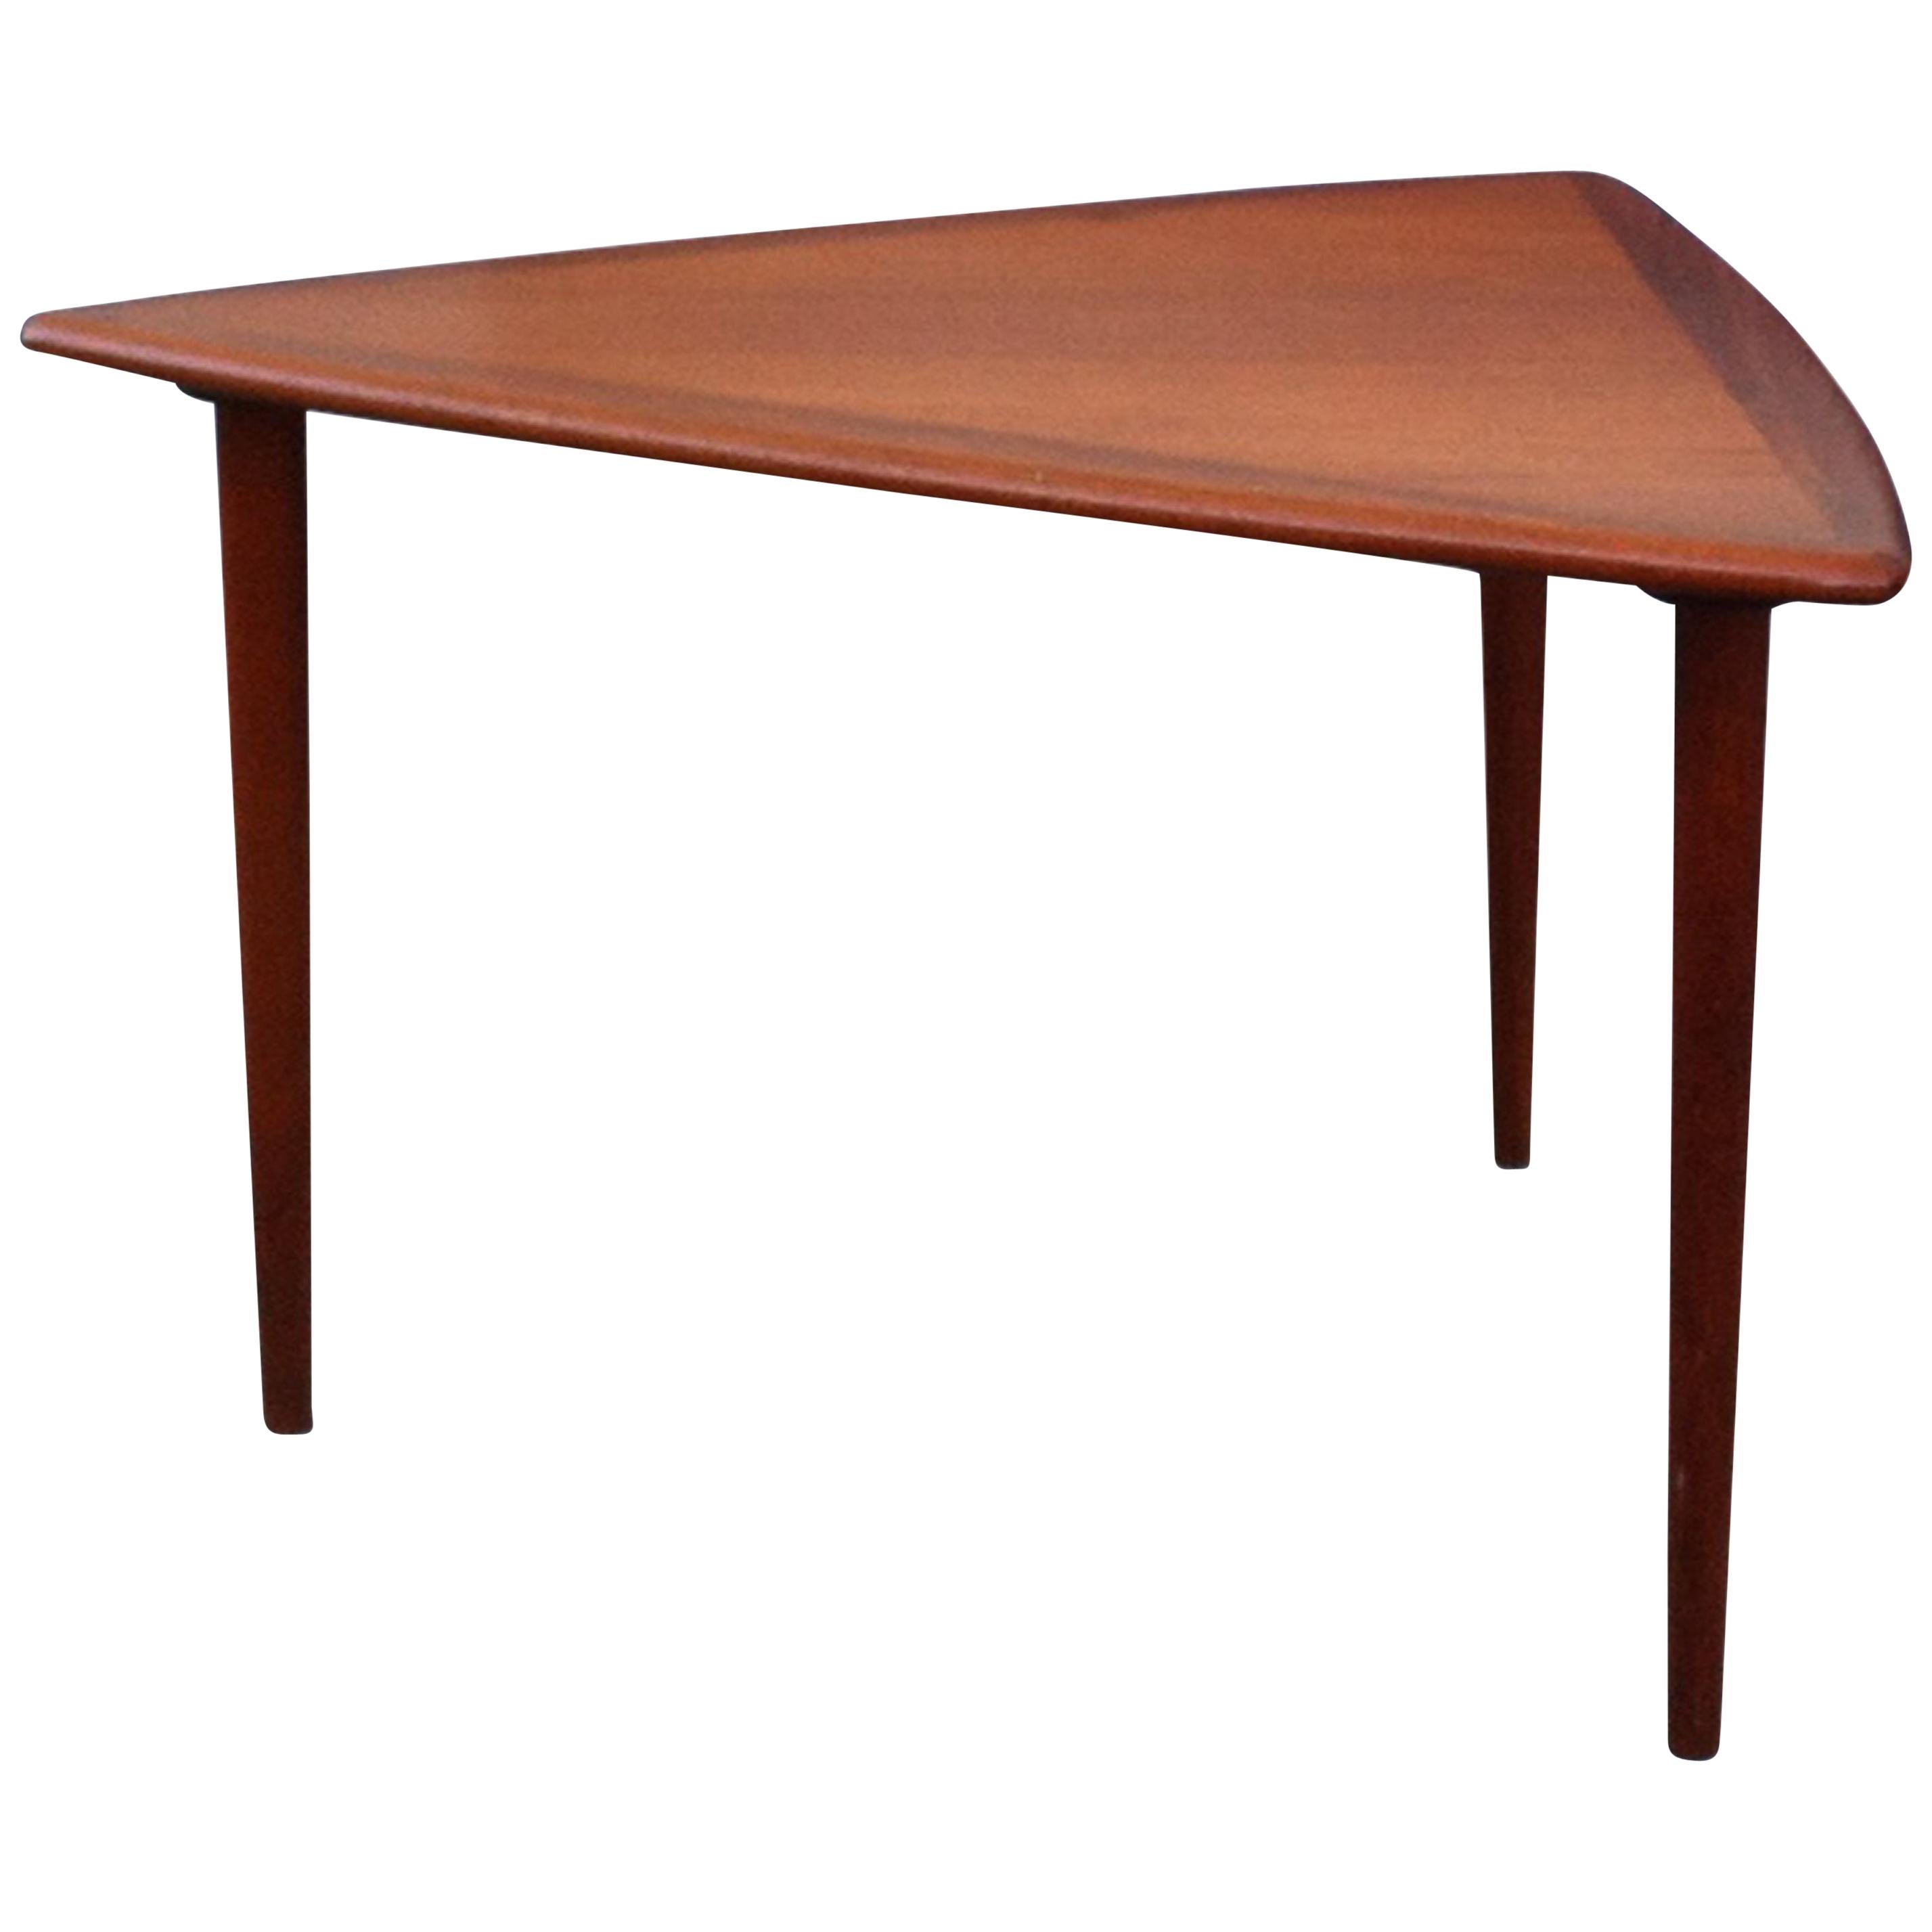 Triangular Shaped Danish Modern Teak Coffee Table with Rounded Profiles, 1960s For Sale